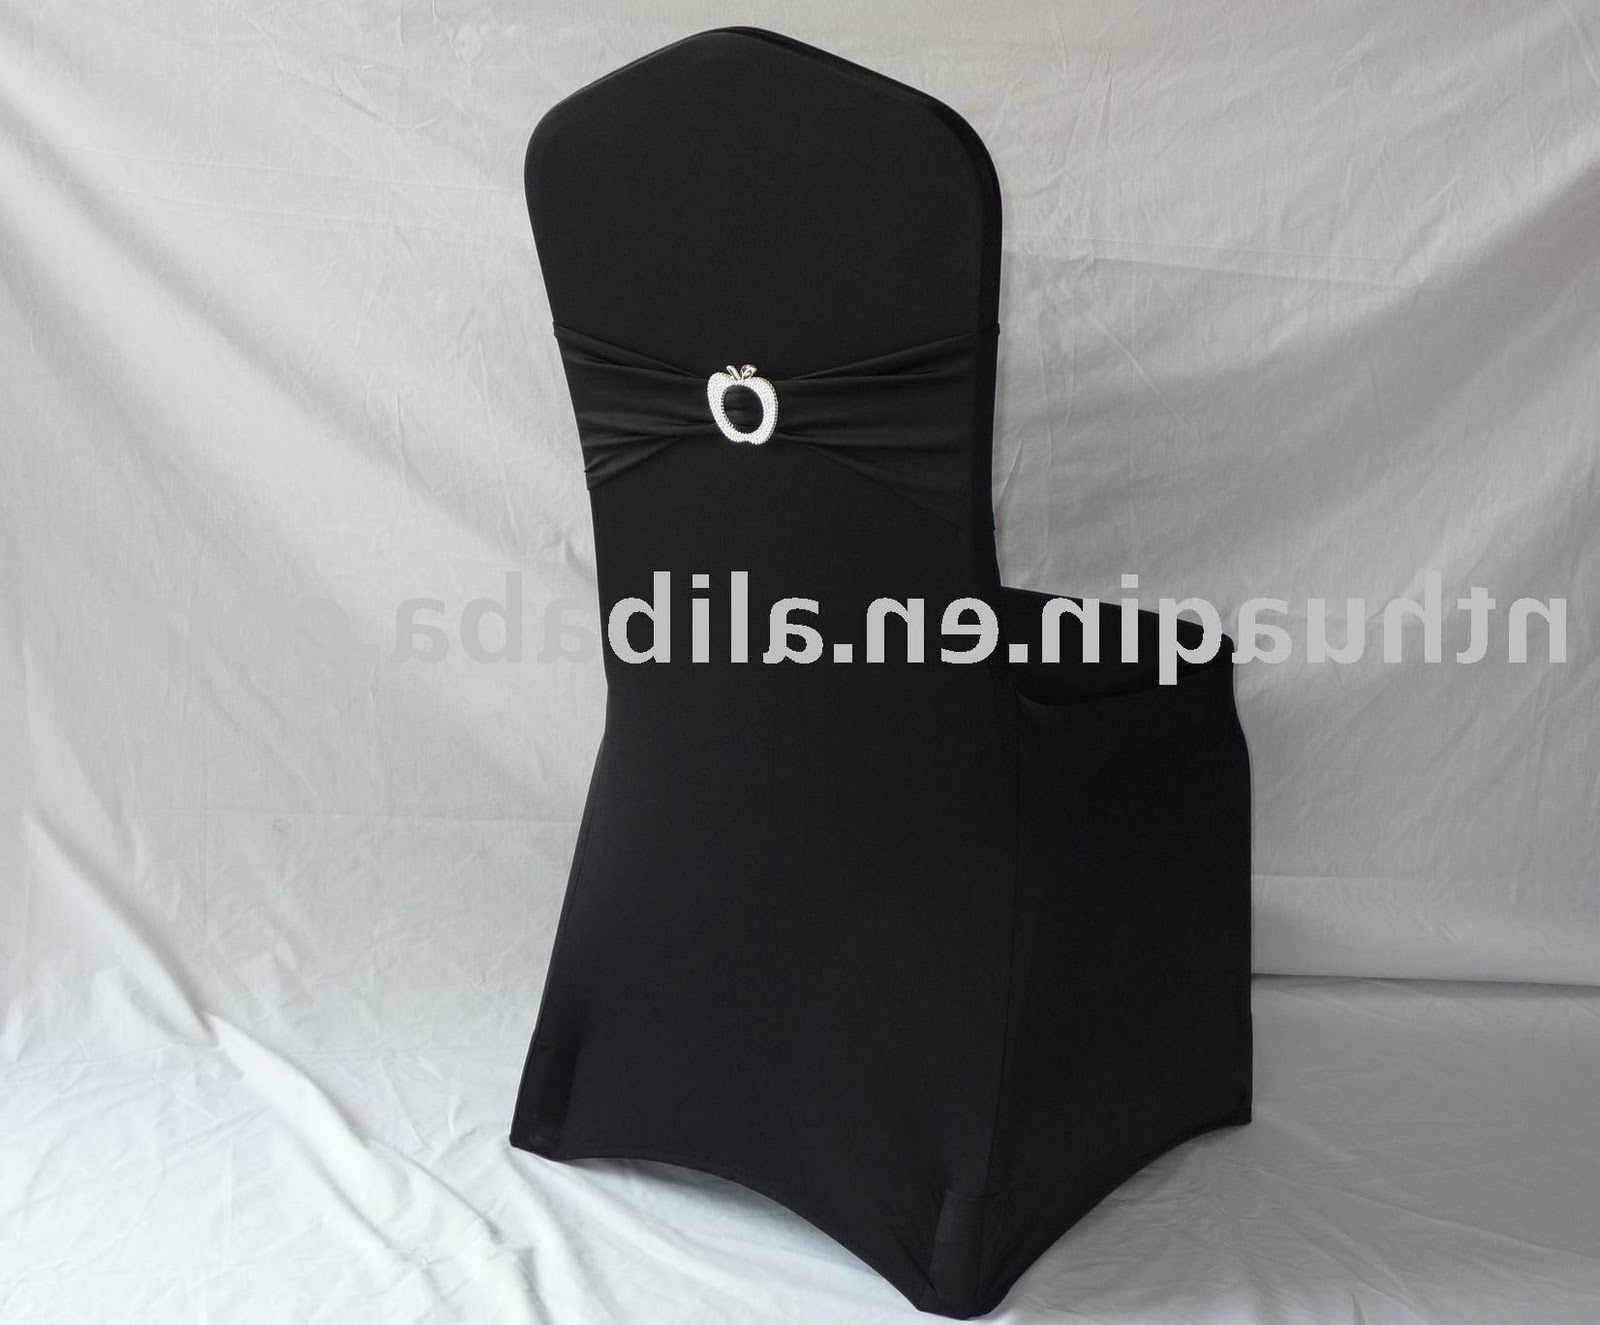 Spandex banquet chair cover, wedding chair cover, lycra chair cover,